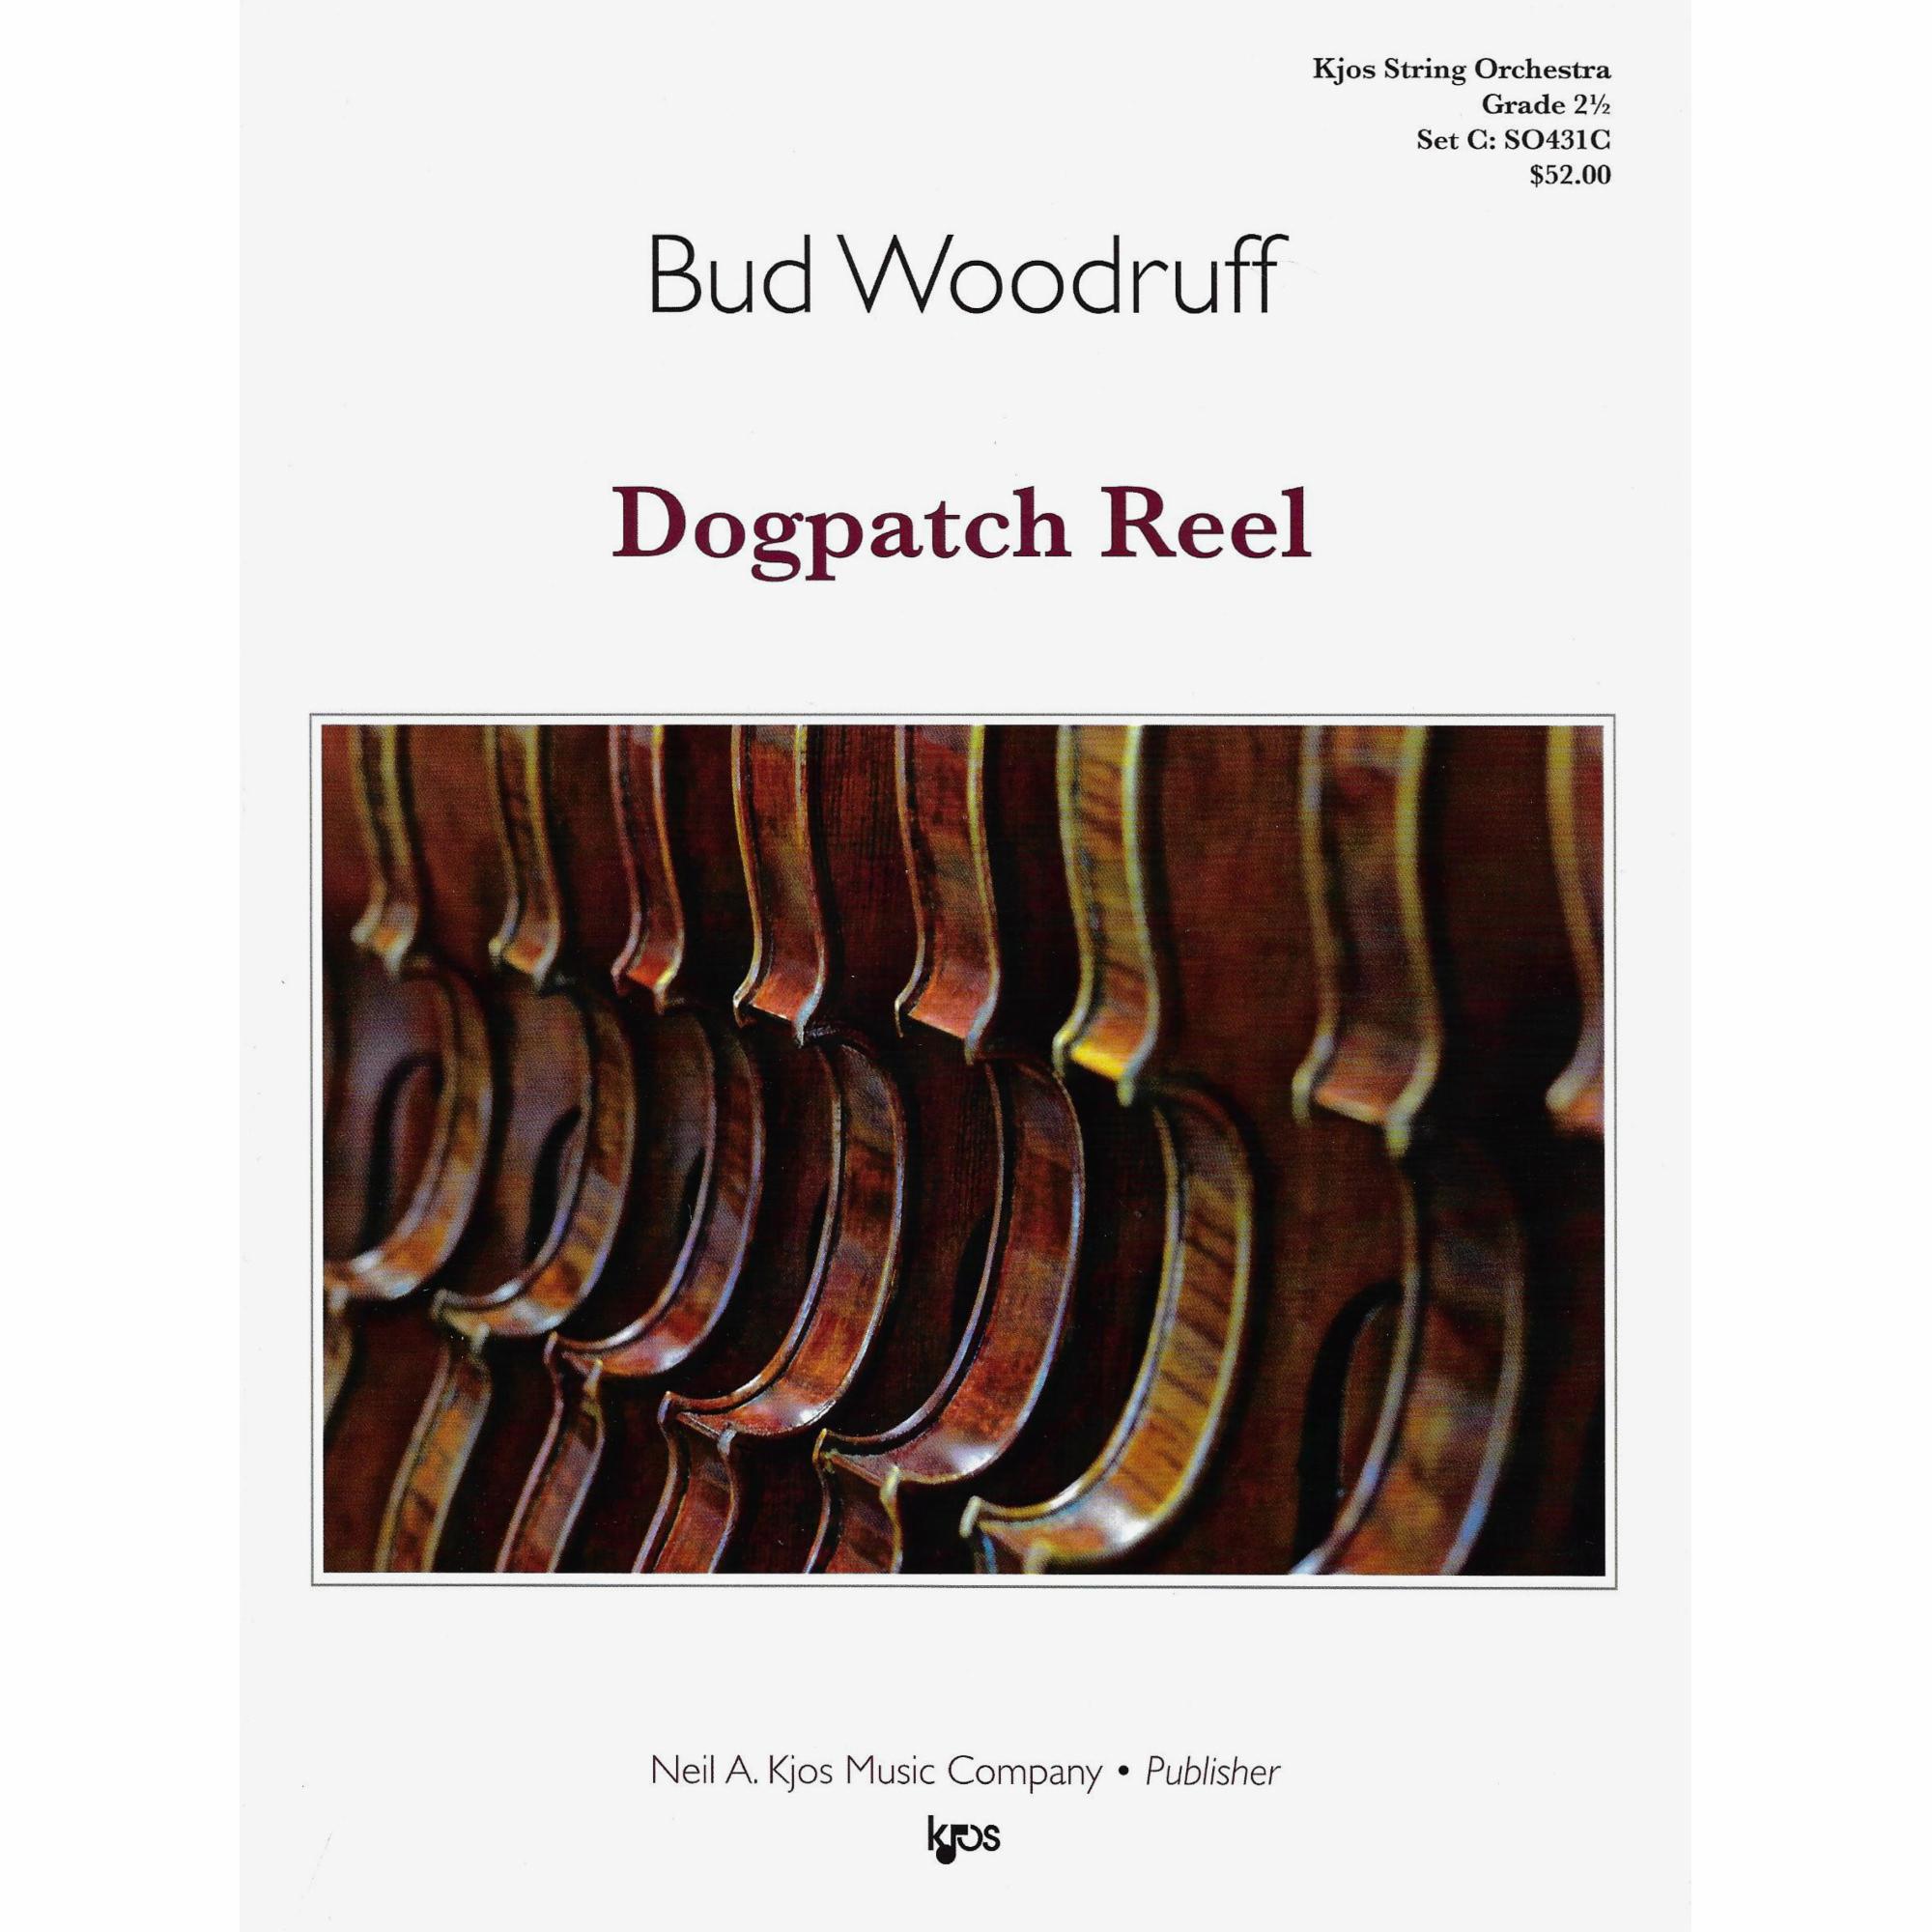 Dogpatch Reel for String Orchestra